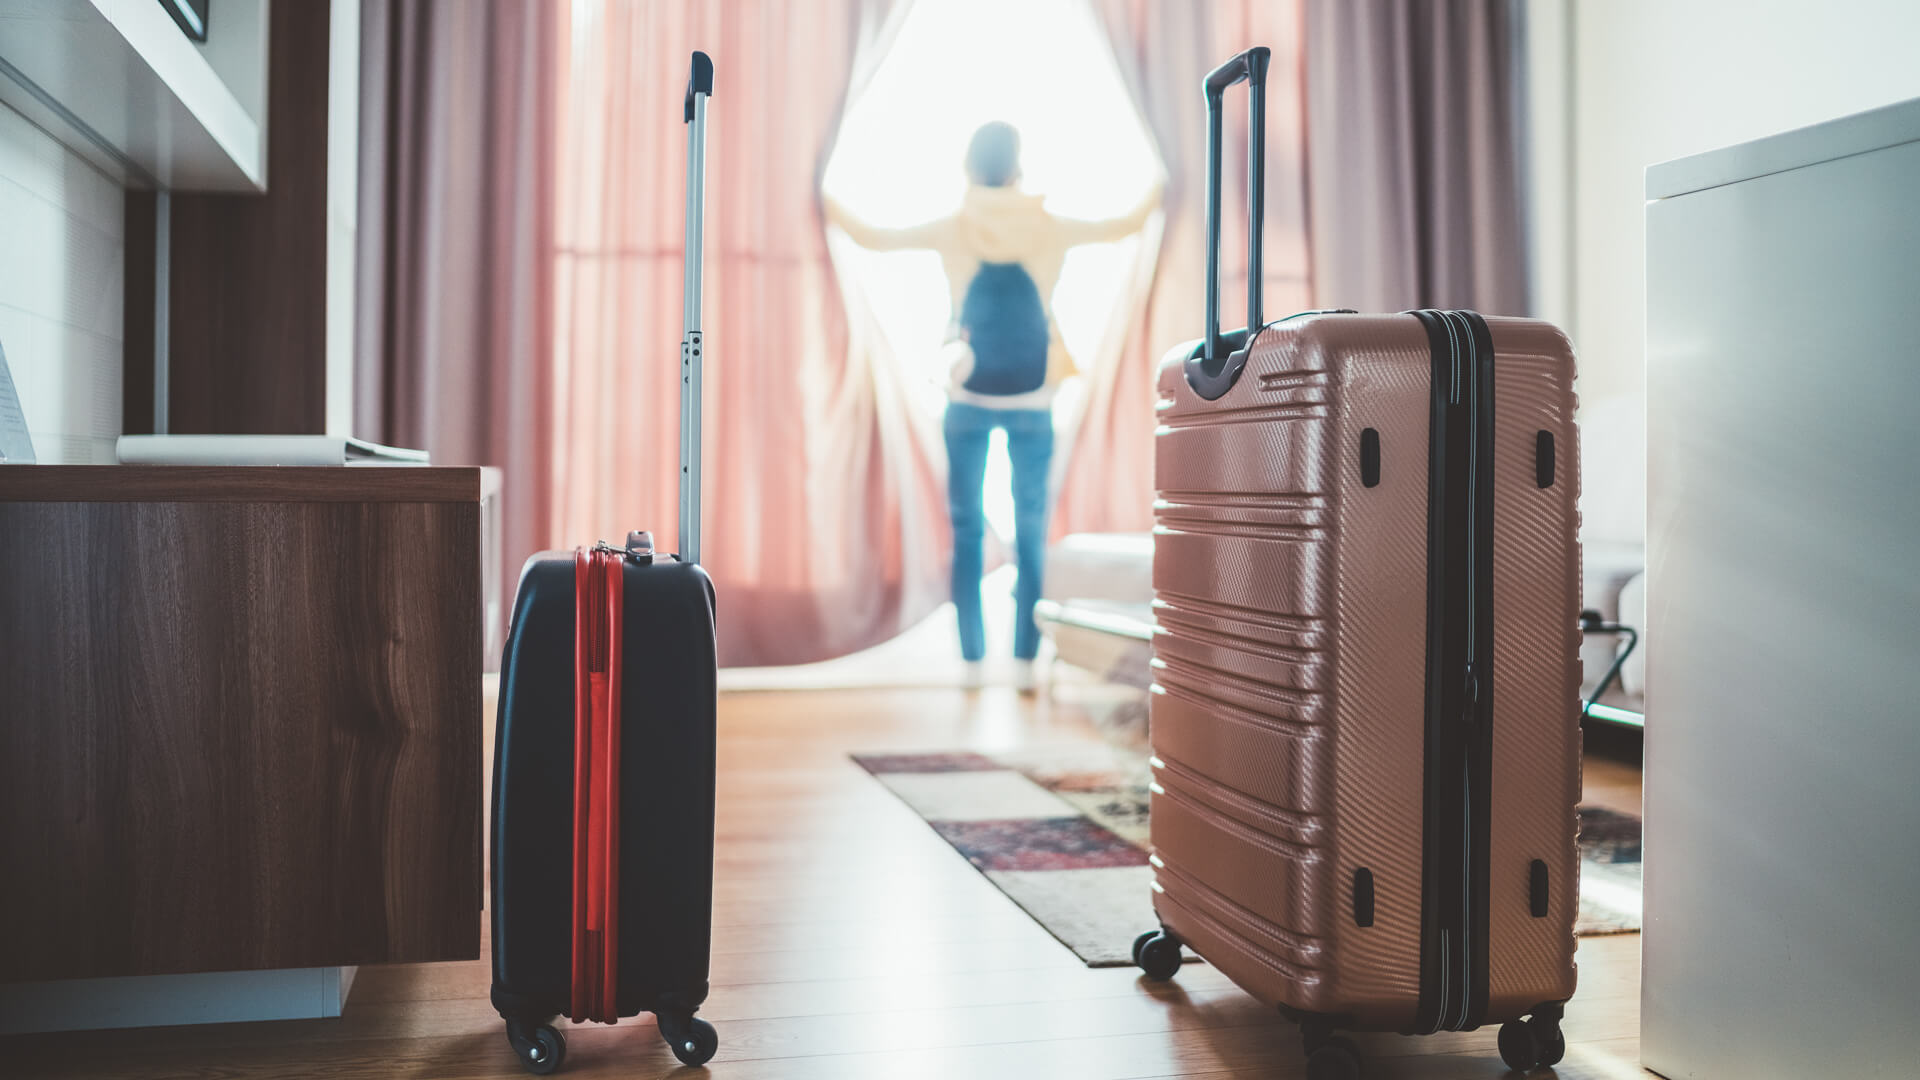 <p>Not only are the costs of rooms rising, but so, too, are the number of rooms that traveling parties are renting, although not as dramatically. In Arizona in 2018, the number of parties renting just one room dropped by more than 3% compared to 2015. During the same time period, the number of people renting two, three, four and five rooms per night increased.</p>